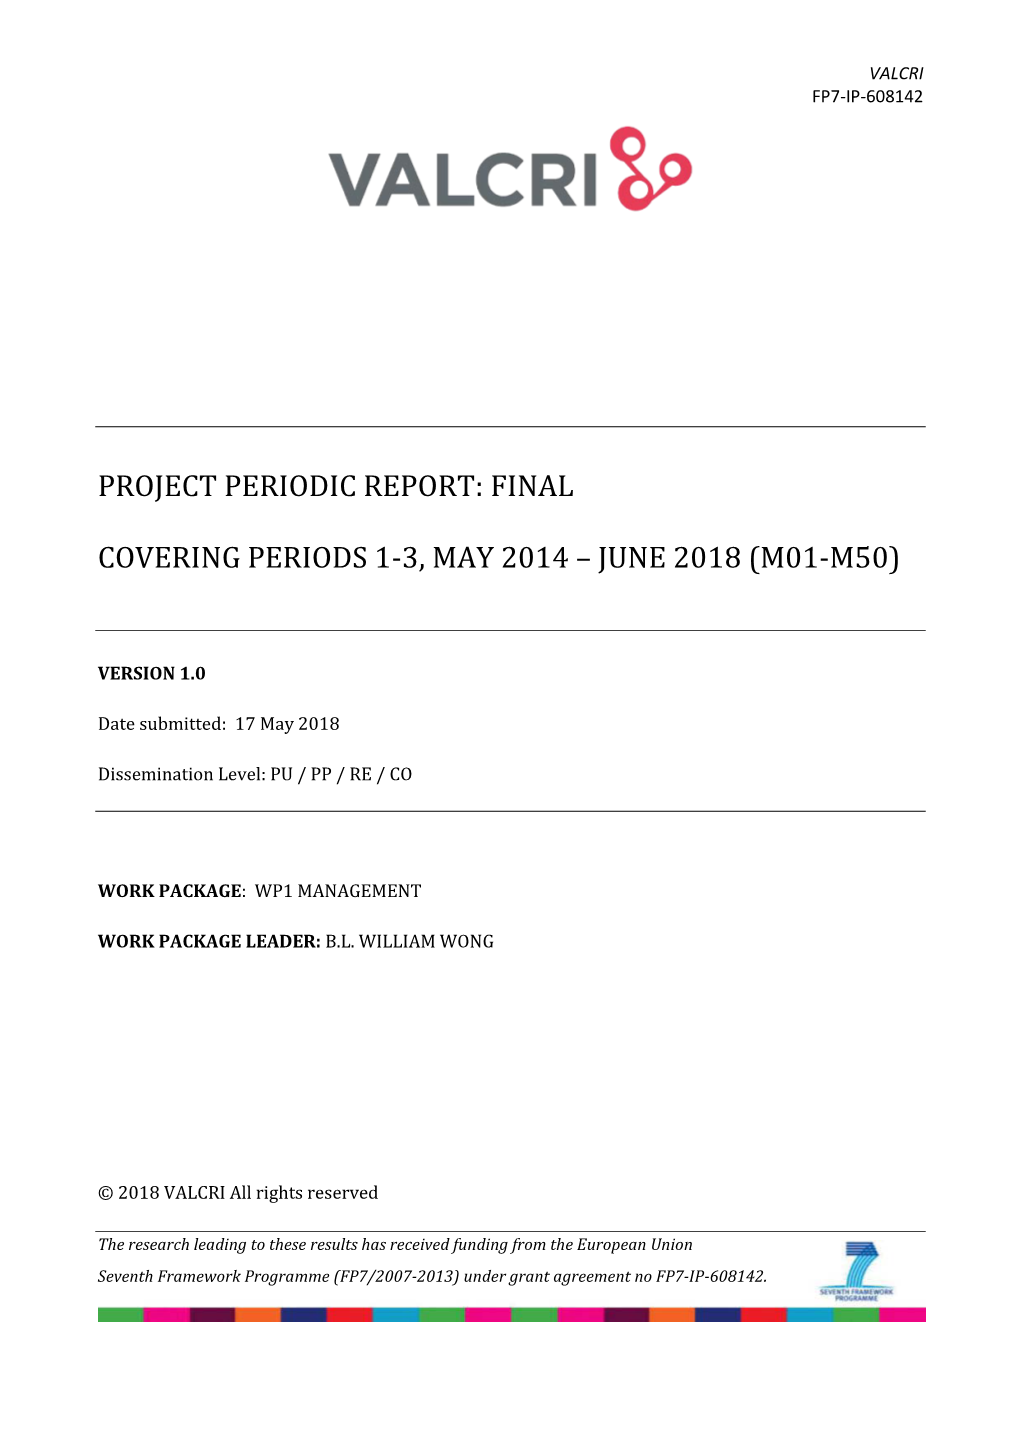 Project Periodic Report: Final